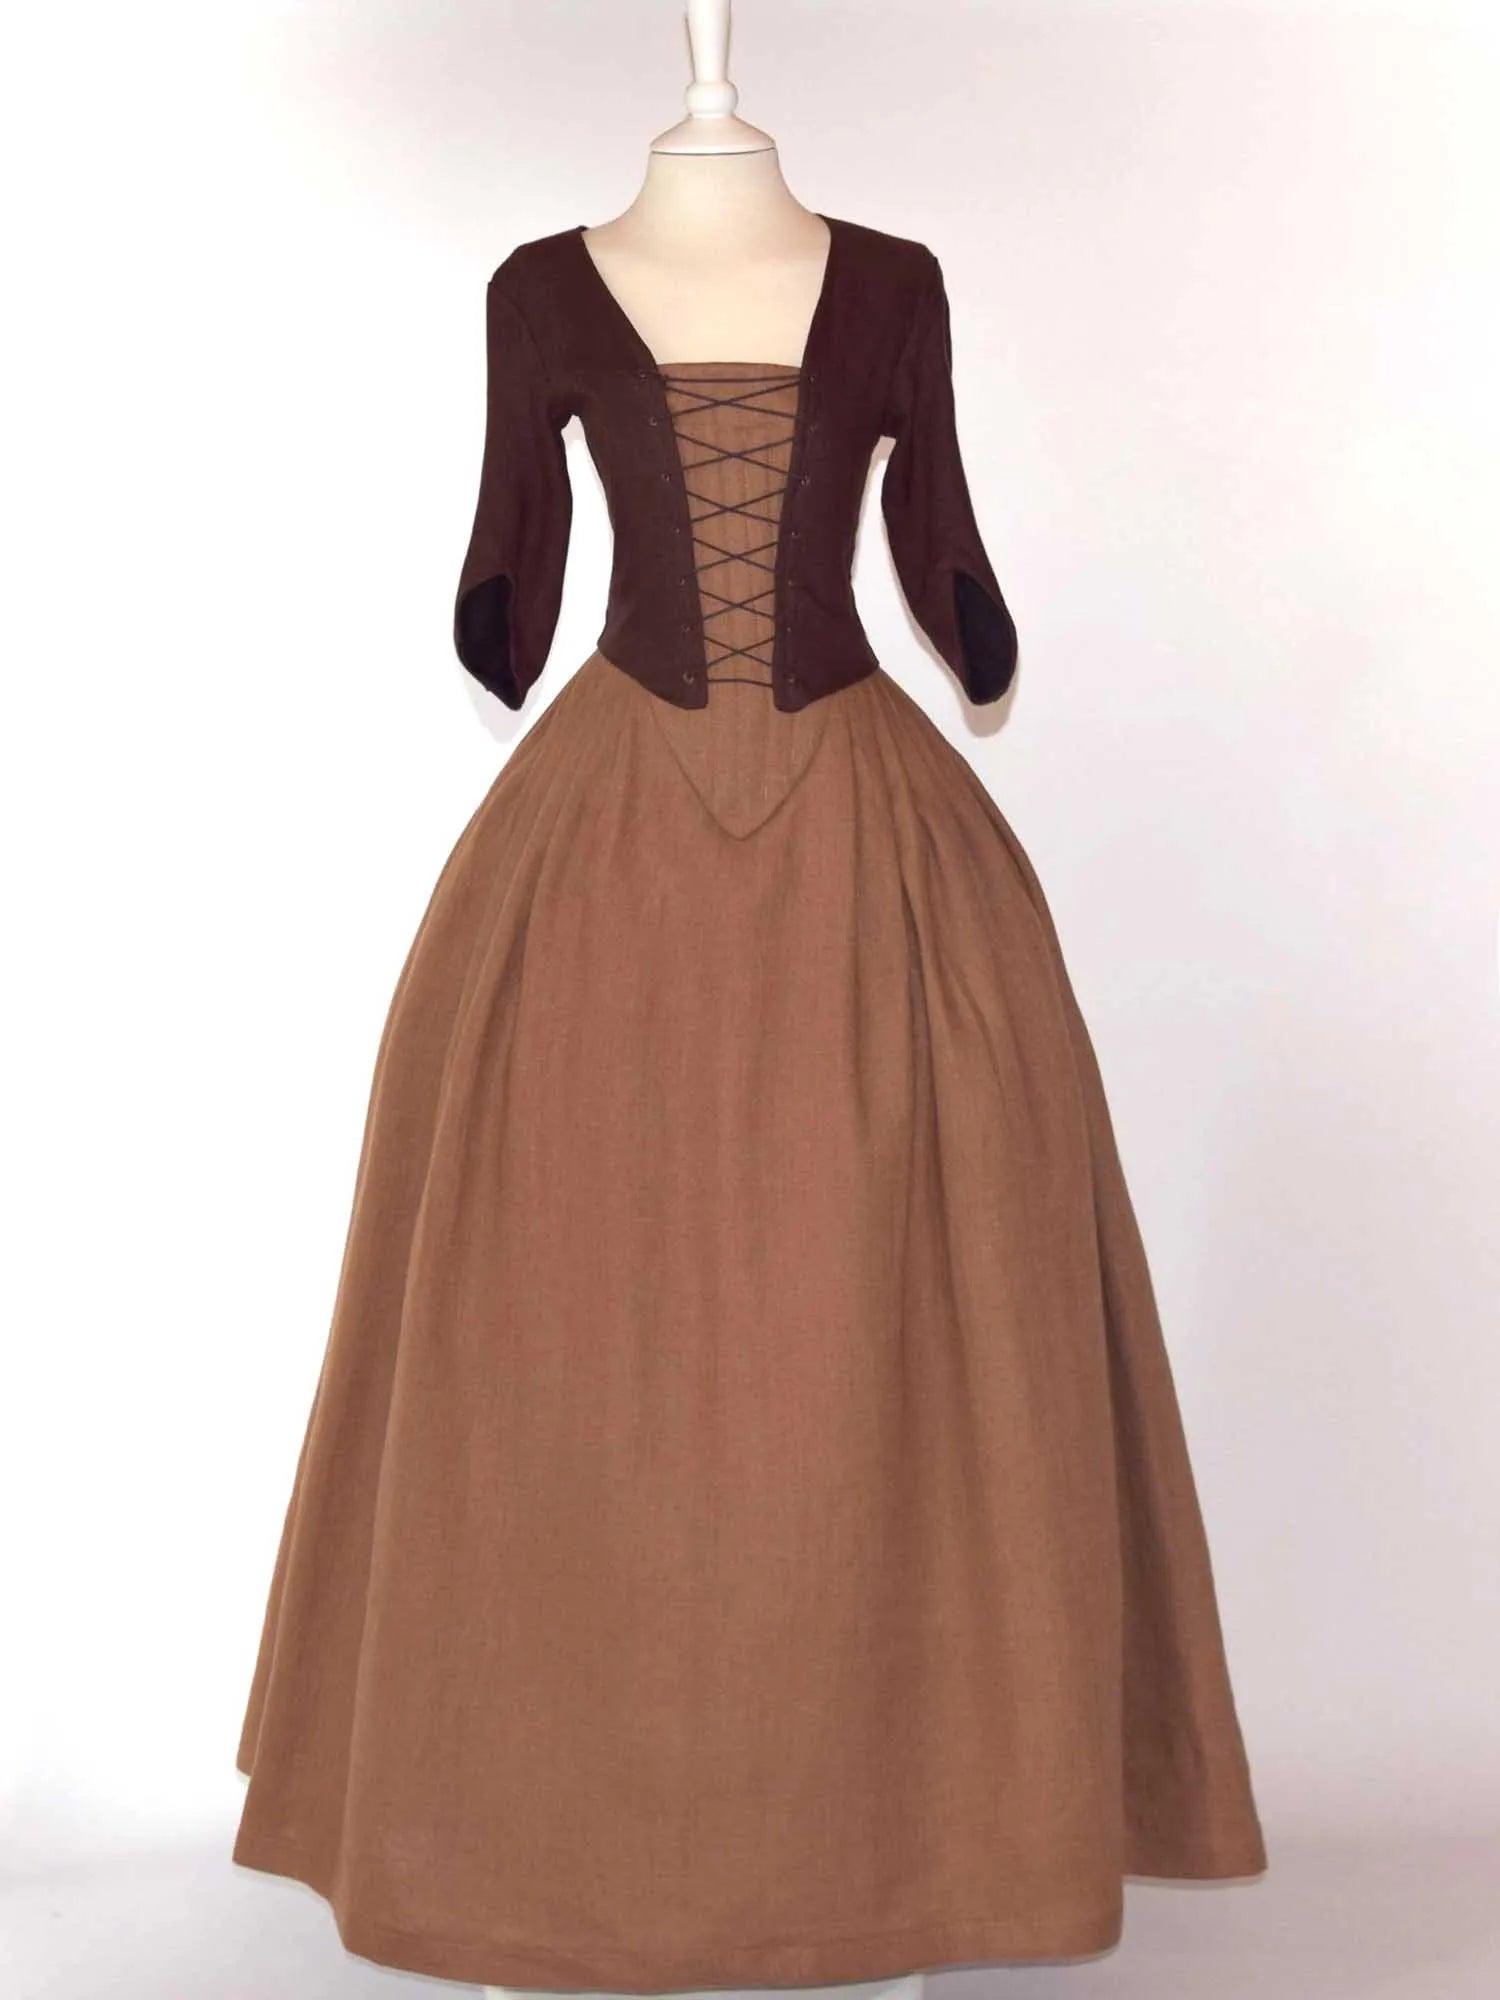 Historical Costume in Chocolate & Toffee Linen - Atelier Serraspina